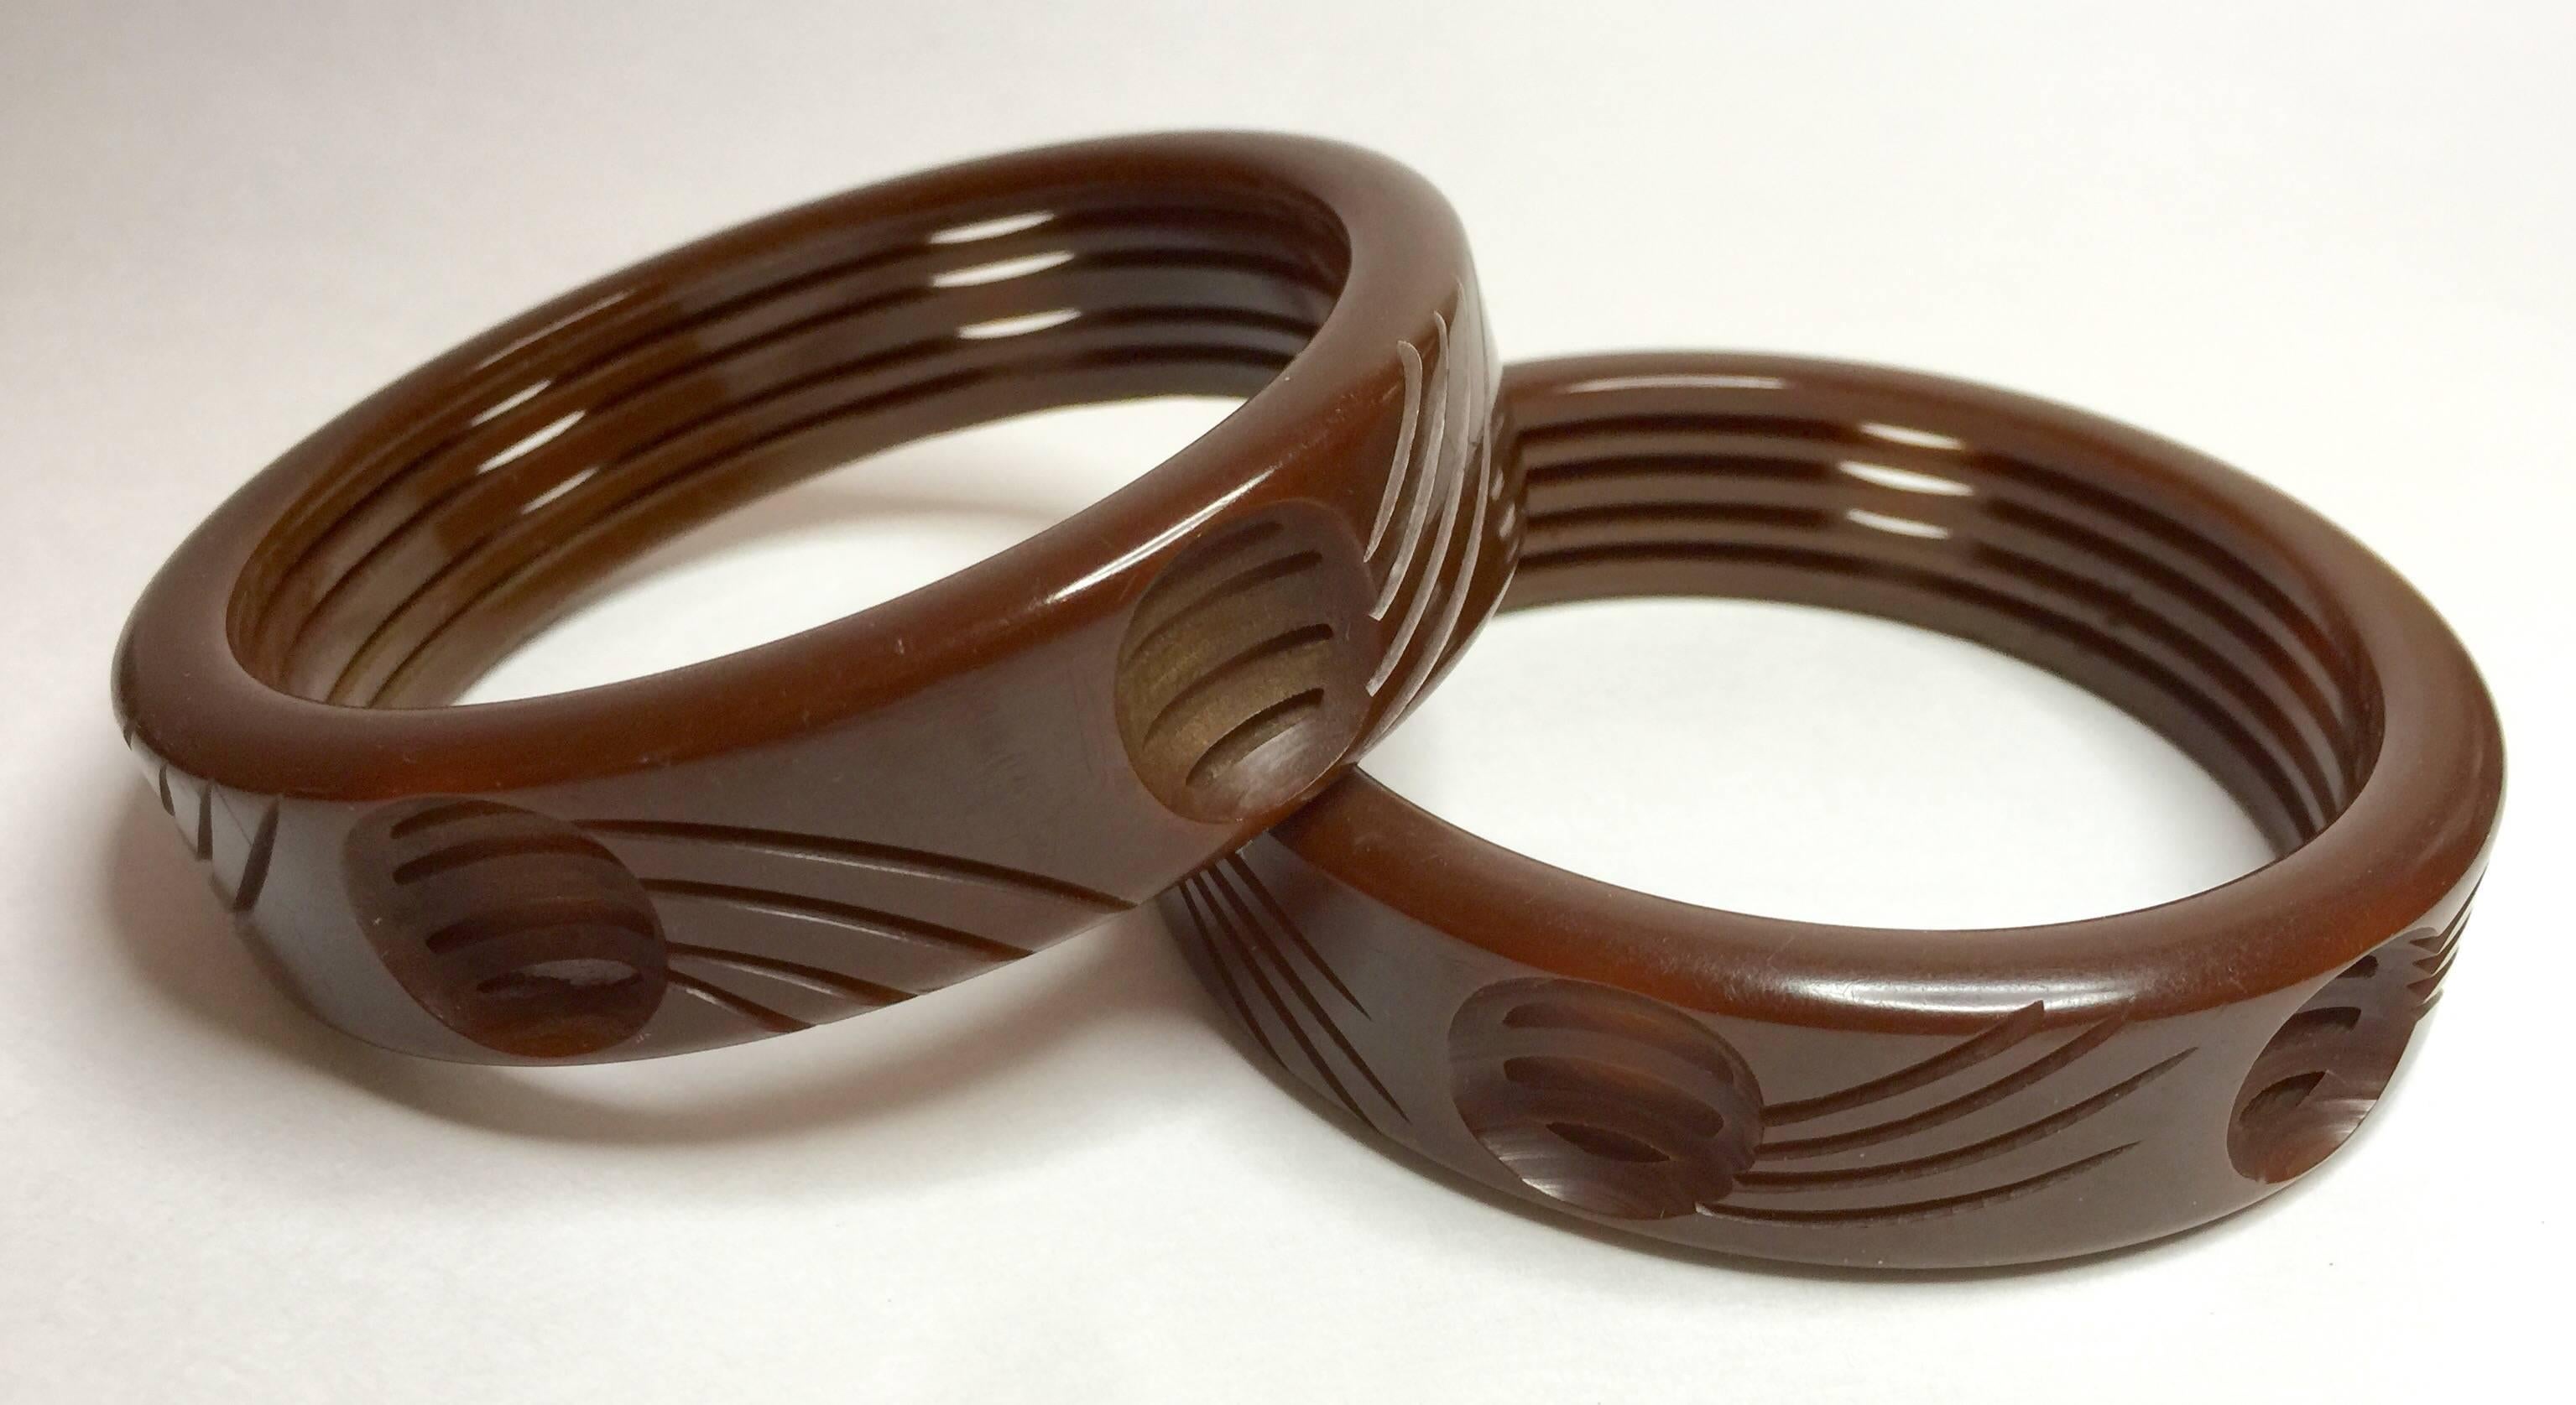 Sold as an identical twosome, these two (2) unusual brown bakelite bangles are stylish and wholly contemporary in tone. Their dimpled carved detail in combination with the unusual concentric cut-out carving on the interior of the bangles makes for